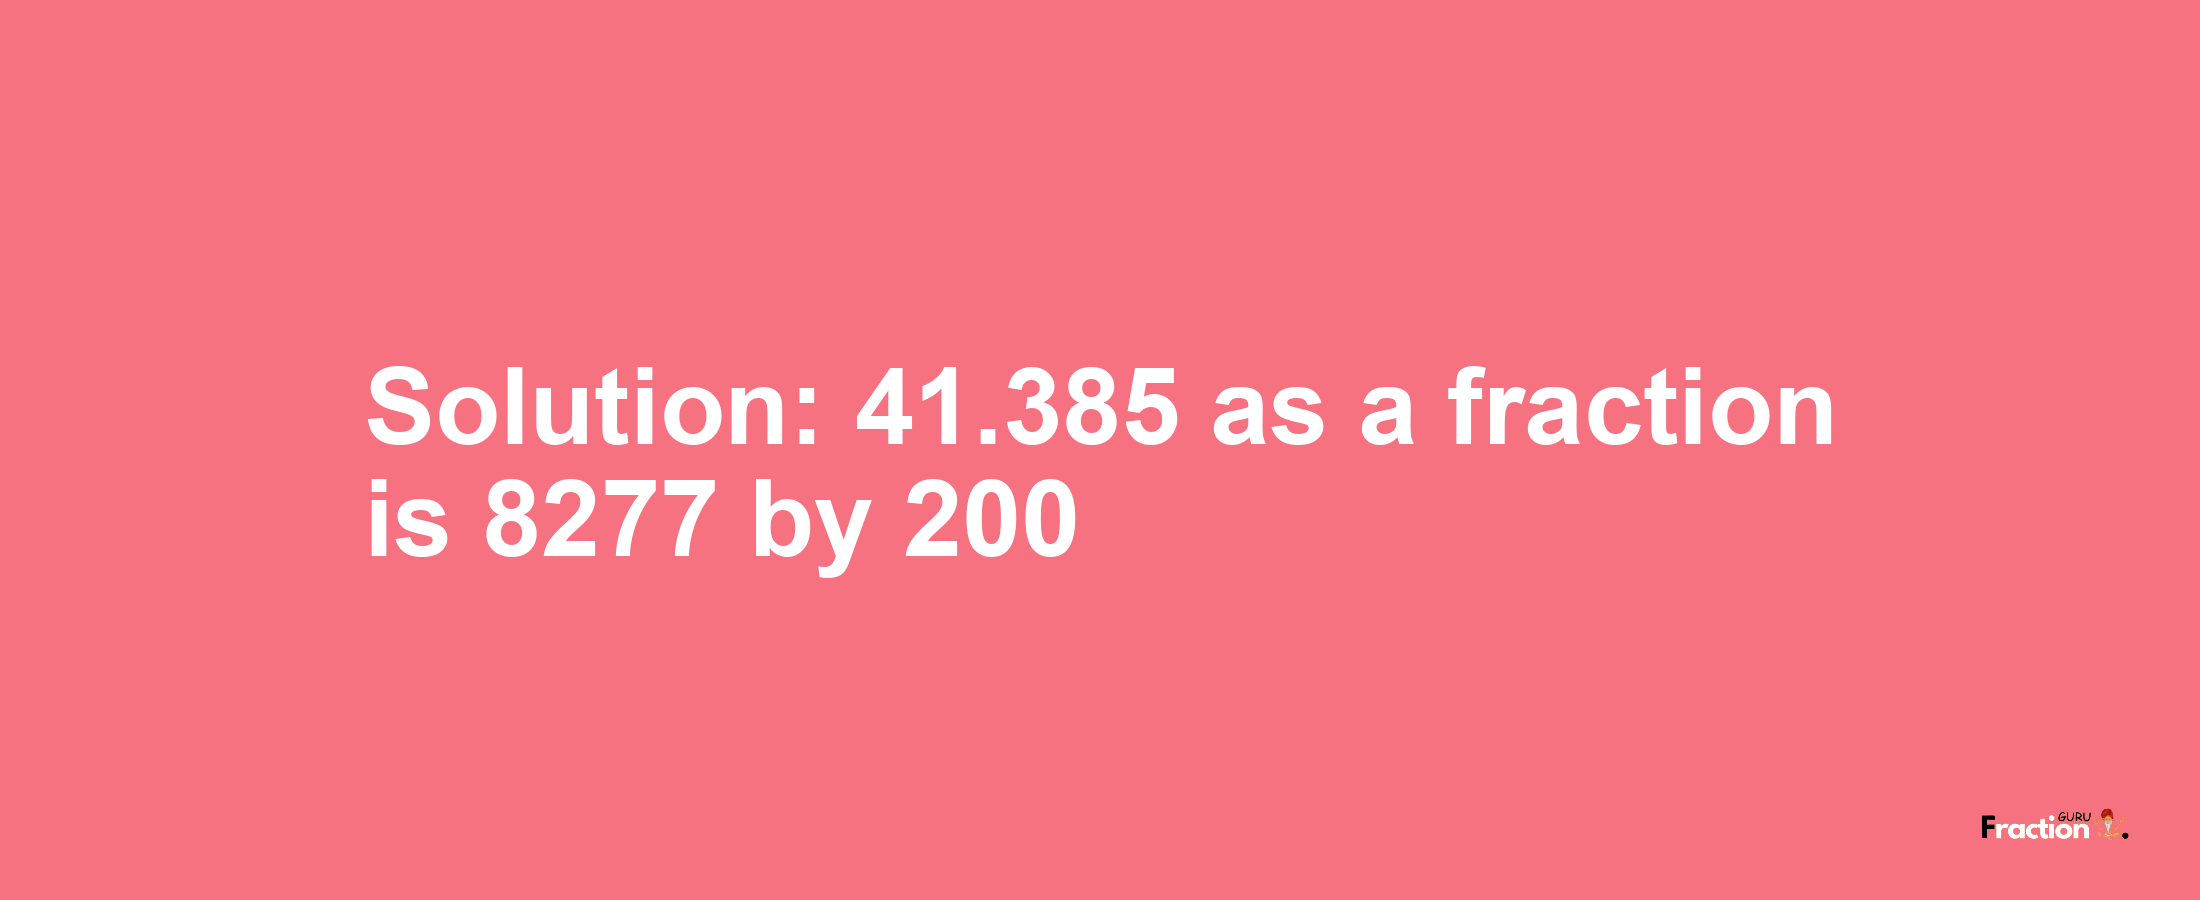 Solution:41.385 as a fraction is 8277/200